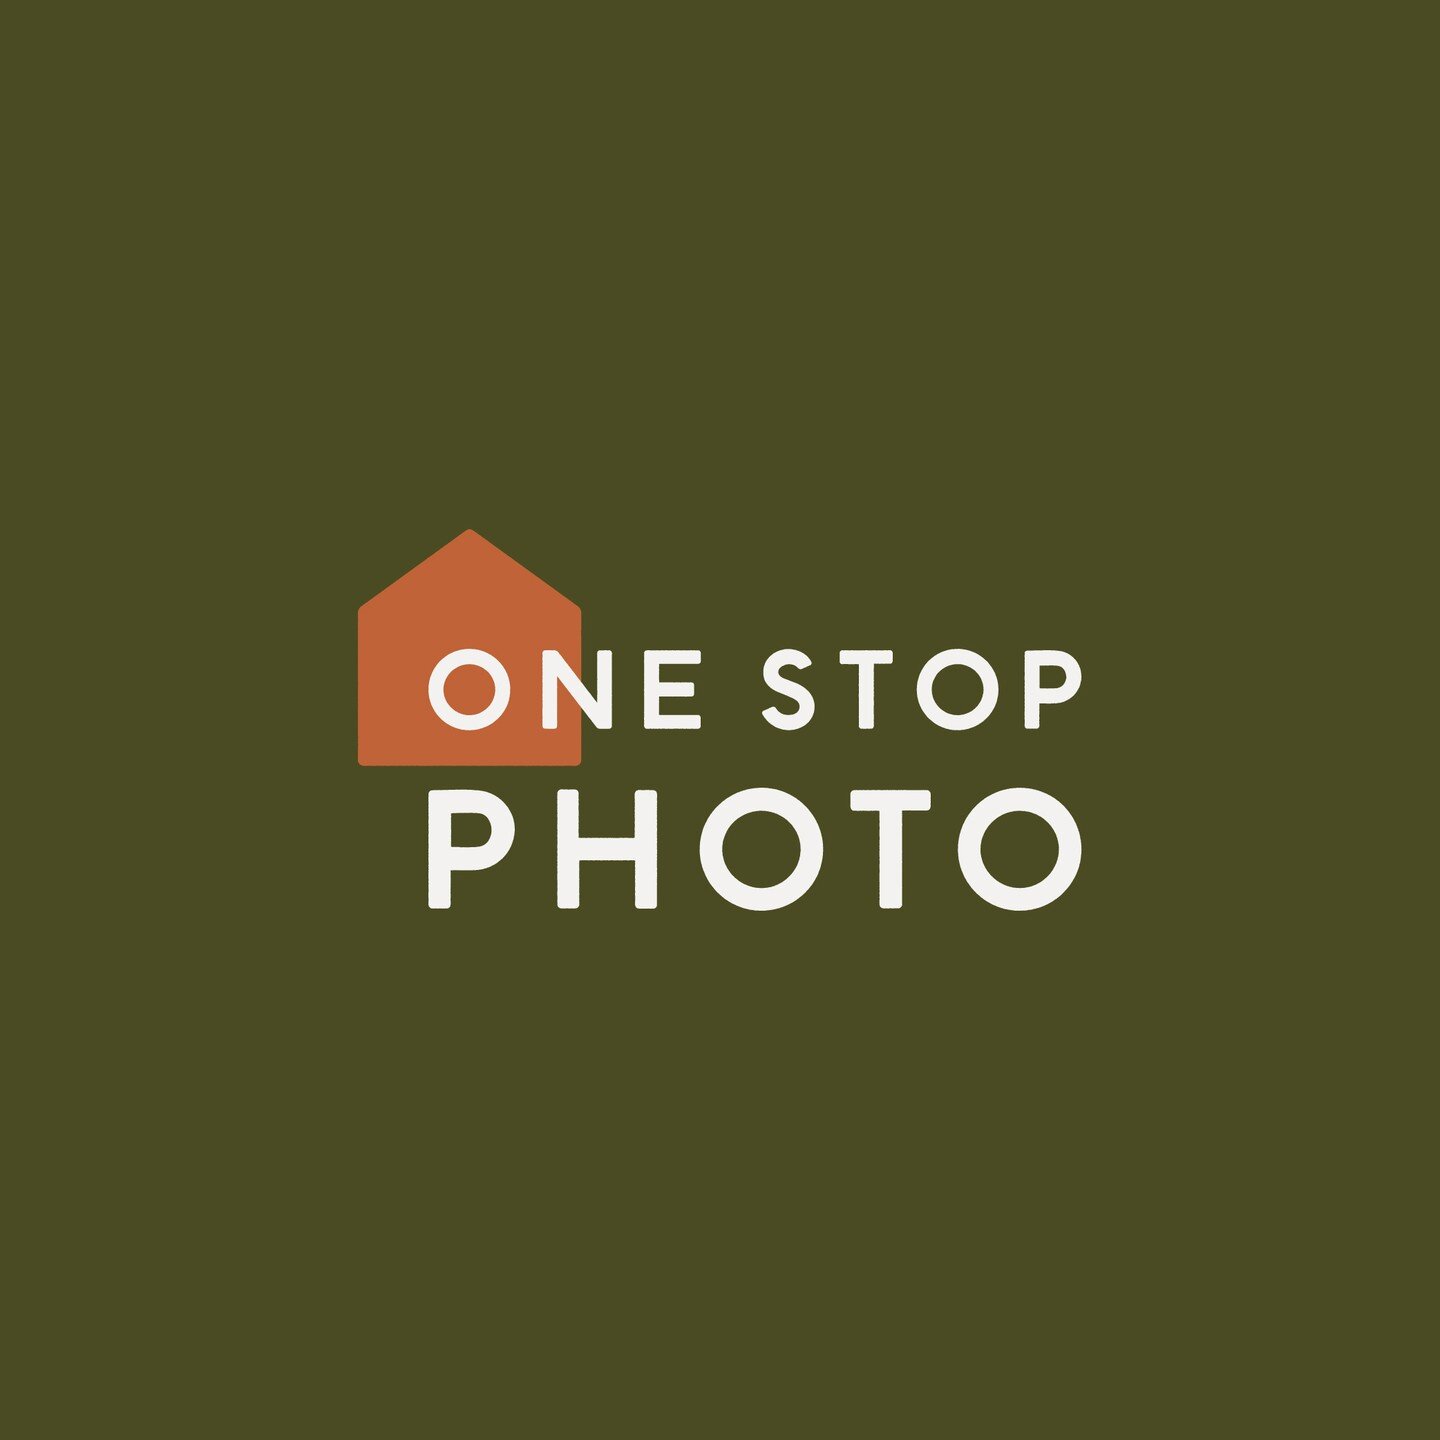 A fun logo I got to make for @onestop.photo, inspired by the drive through photo huts from the 70 &amp; 80s. 
_
_
_
#itsnicethat #freelancingfemales #tdkpeepshow #createcultivate #eyeondesign #designoutput #logoexpose #creativebiz #graphicdesignblg #